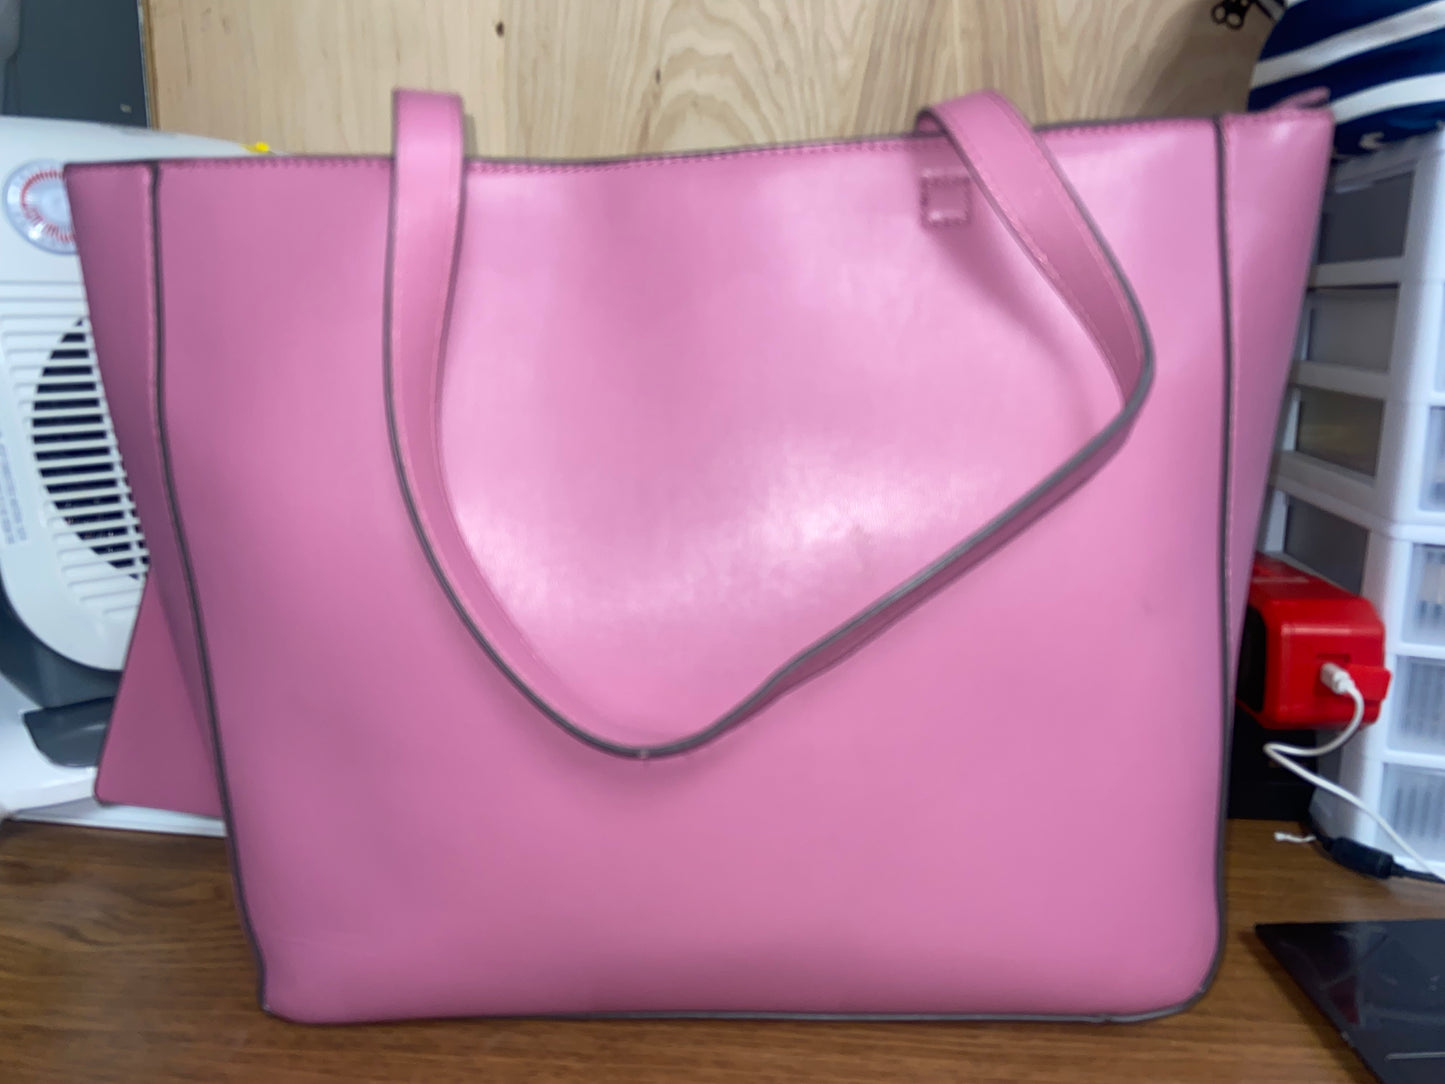 Karl Lagerfeld Paris Pale Magenta Canelle Bow Tote Bag